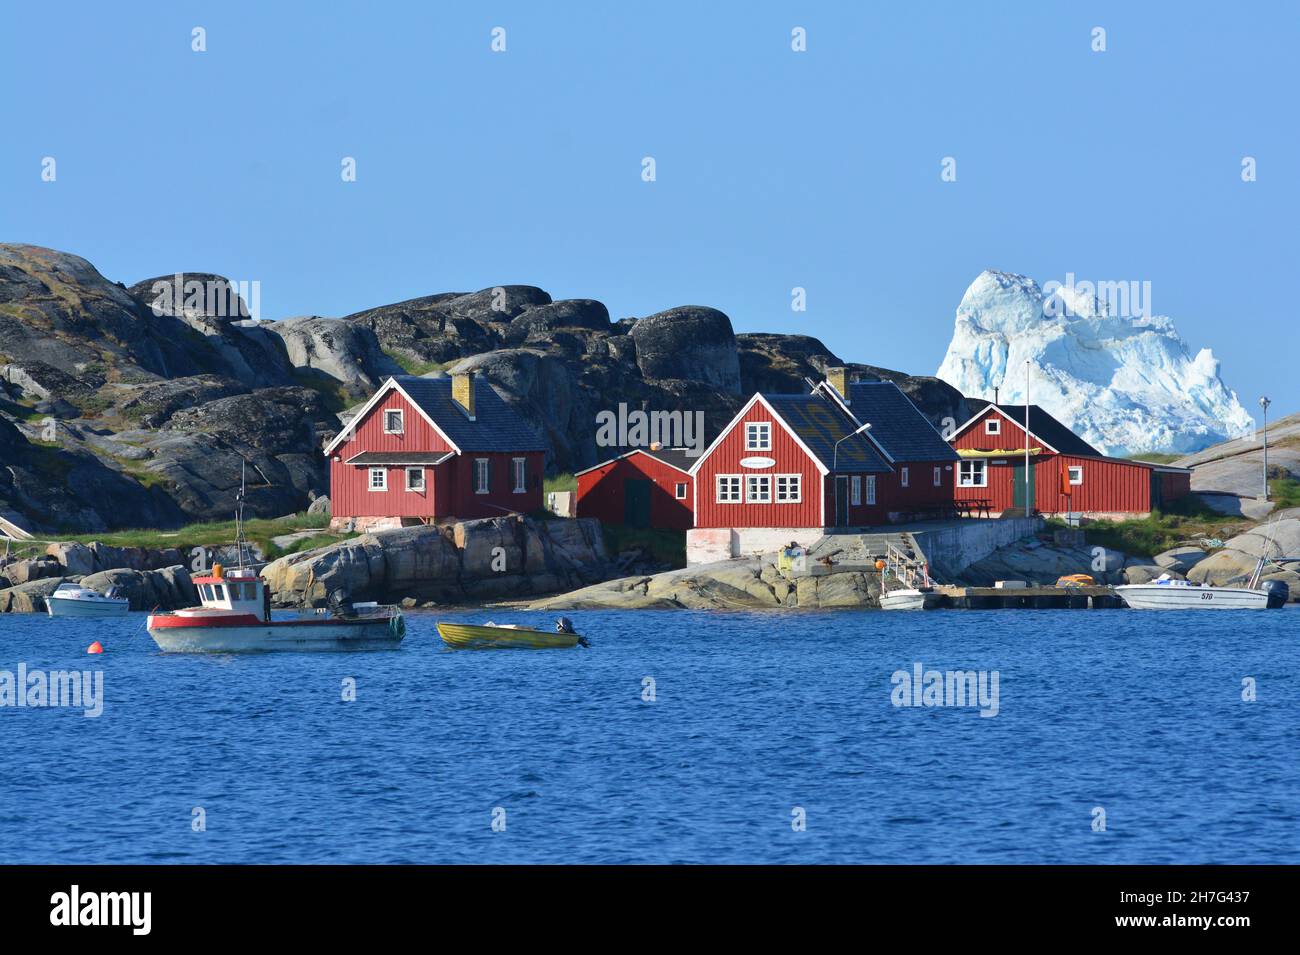 DENMARK. GREENLAND. WEST COAST. OQAATSUT BAY. ICEBERG BEHIND THE  HOUSES OF THE VILLAGE OF OQAATSUT, FORMER WHALE HUNTING STATION. Stock Photo